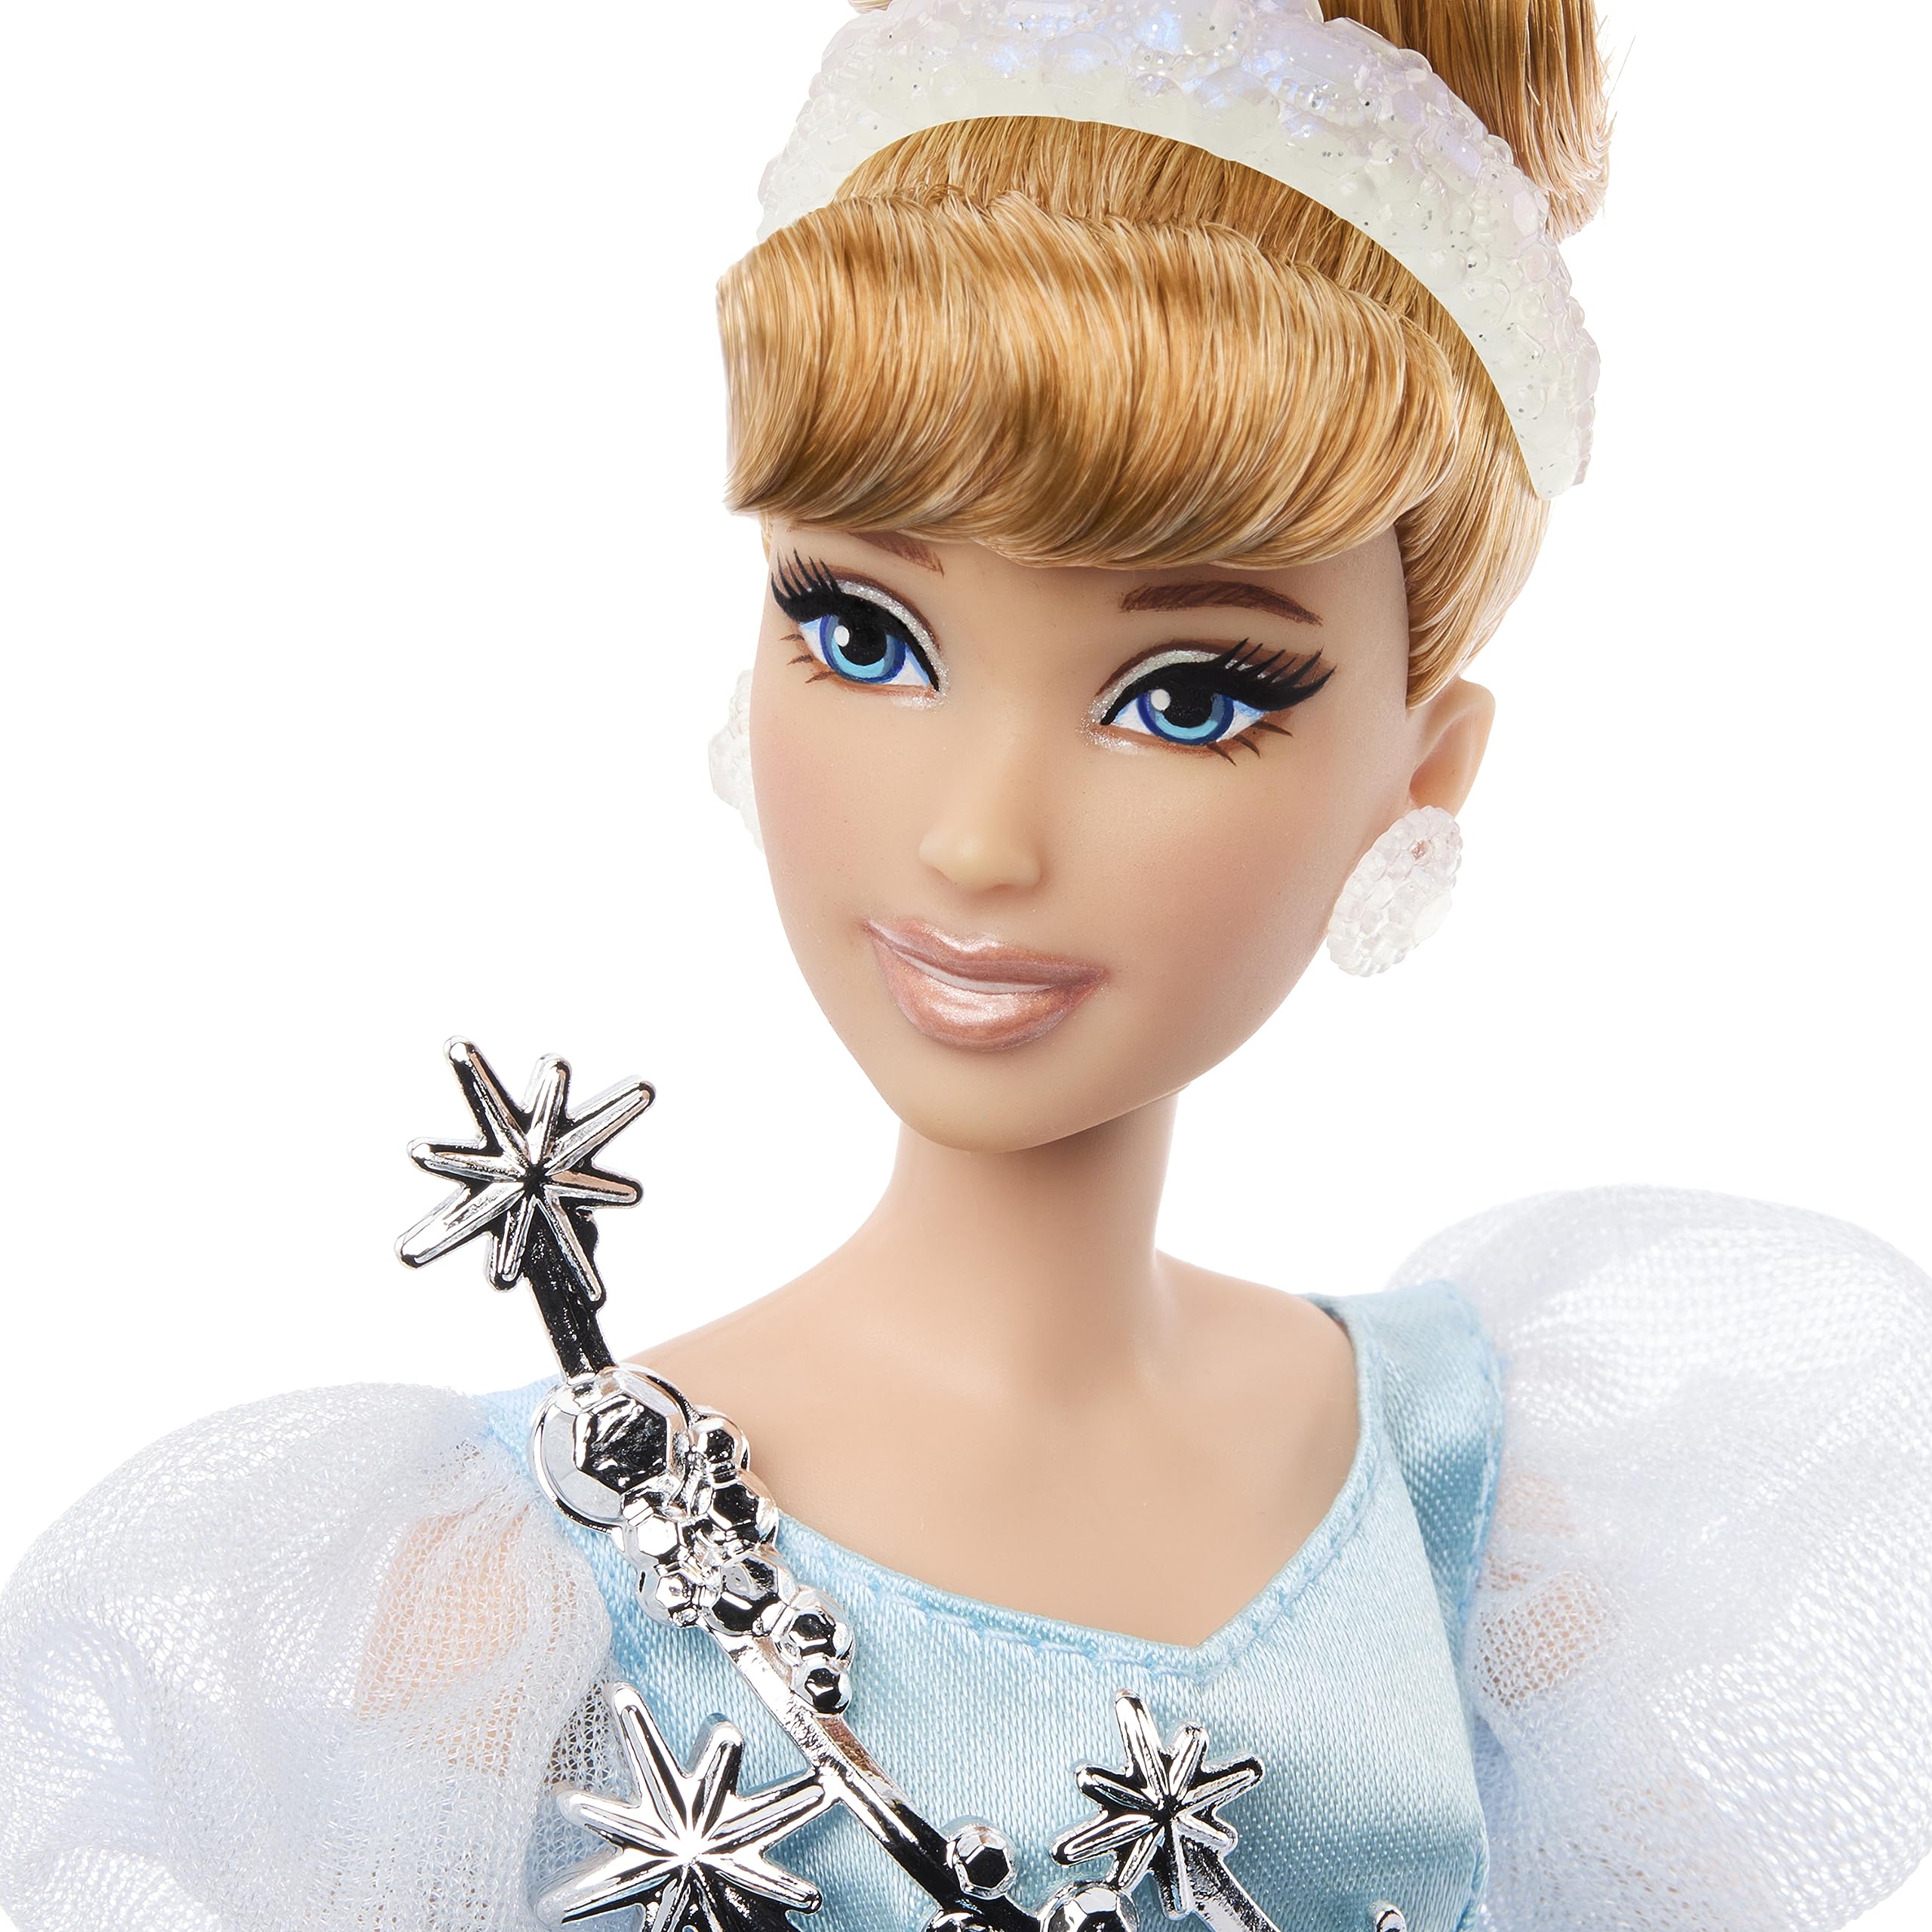 Disney Toys, Collector Cinderella Doll to Celebrate Disney 100 Years of Wonder, Inspired by Disney Movie, Gifts for Kids and Collectors